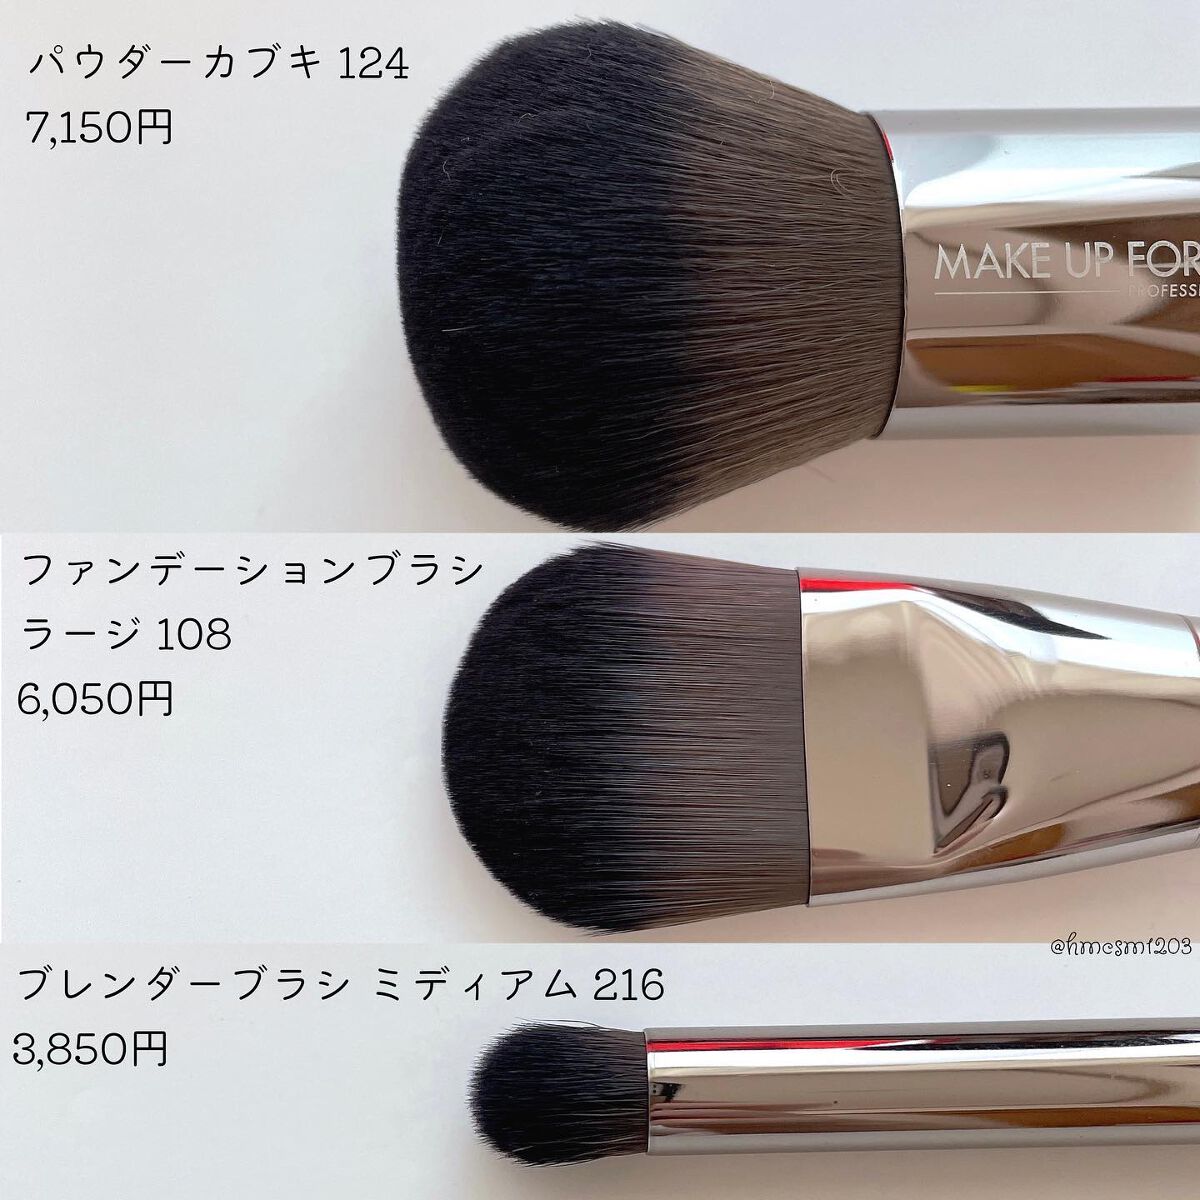 make up for ever メイクアップフォーエバー メイクブラシ - その他